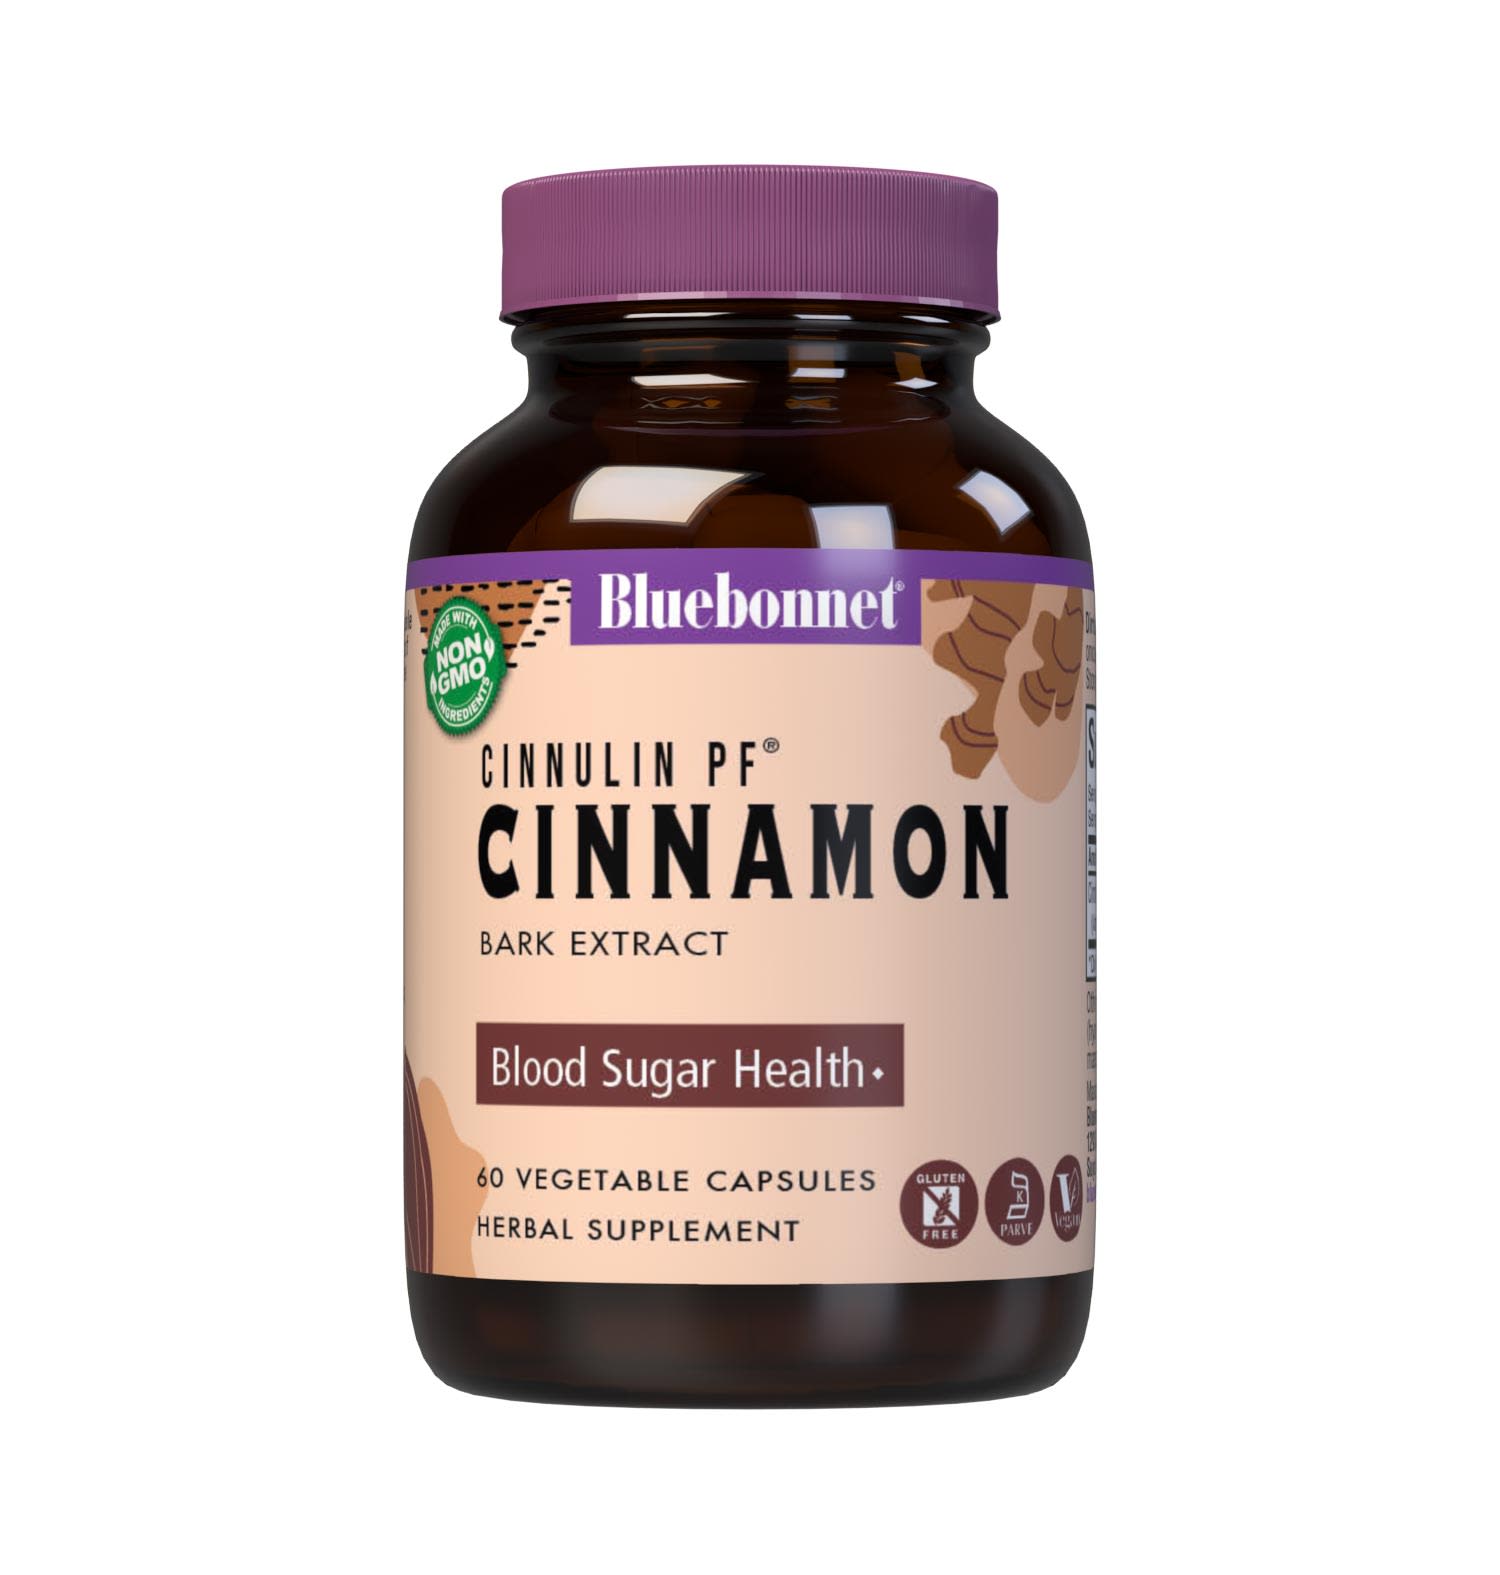 Bluebonnet’s Cinnulin PF Cinnamon Bark Extract 60 Vegetable Capsules contain a water-soluble extract that is carefully produced by a clean and gentle water-based extraction method is employed to capture and preserve cinnamon’s most valuable components while eliminating toxic compounds typically found in whole cinnamon and fat-soluble cinnamon extracts. Cinnamon may help to support healthy blood sugar levels already within normal range. #size_60 count